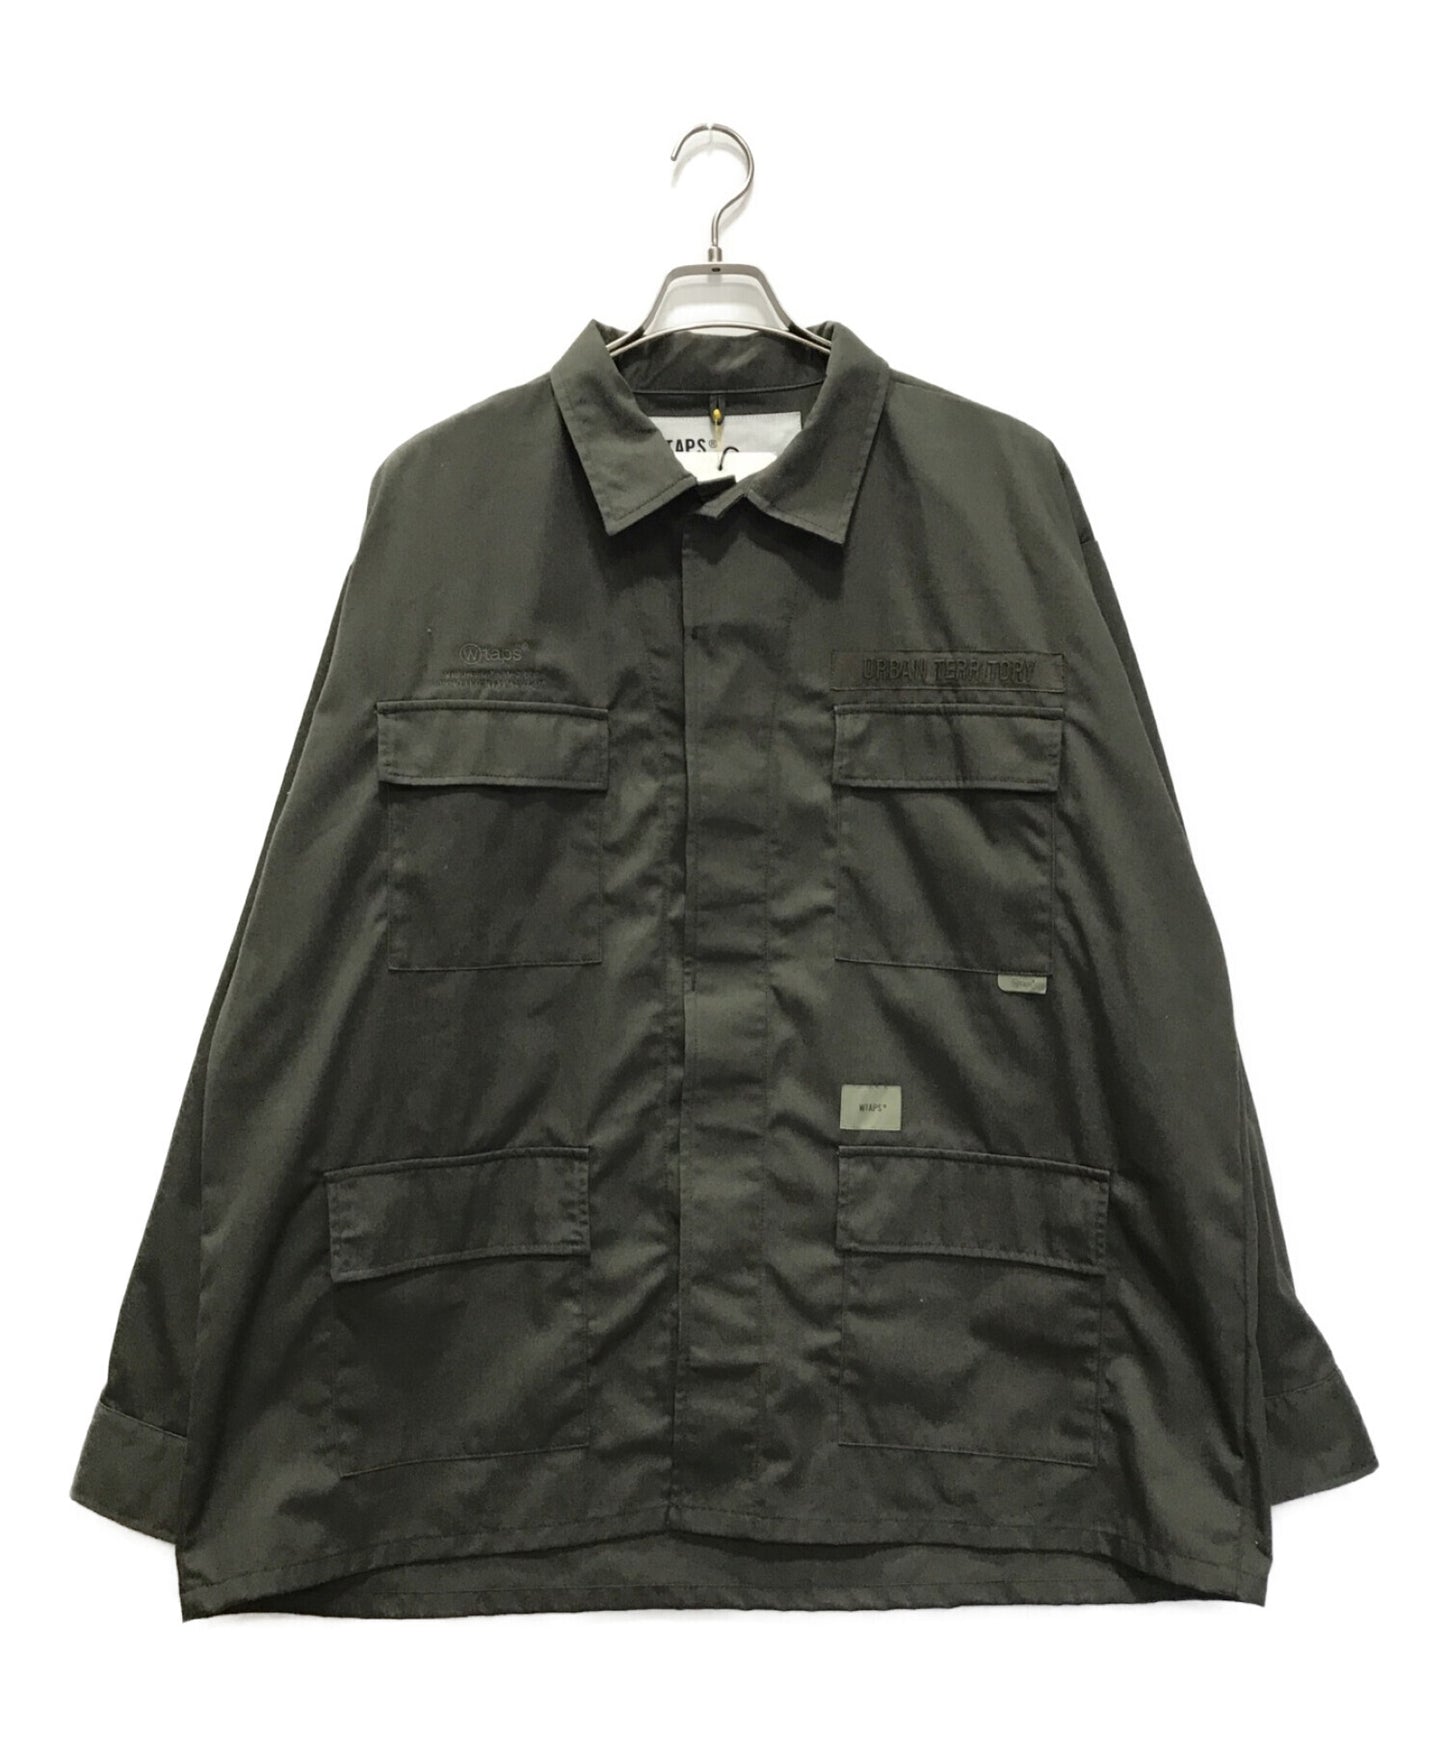 [Pre-owned] WTAPS Jungle LS Shirt Olive Drab 222wvdt-shm03